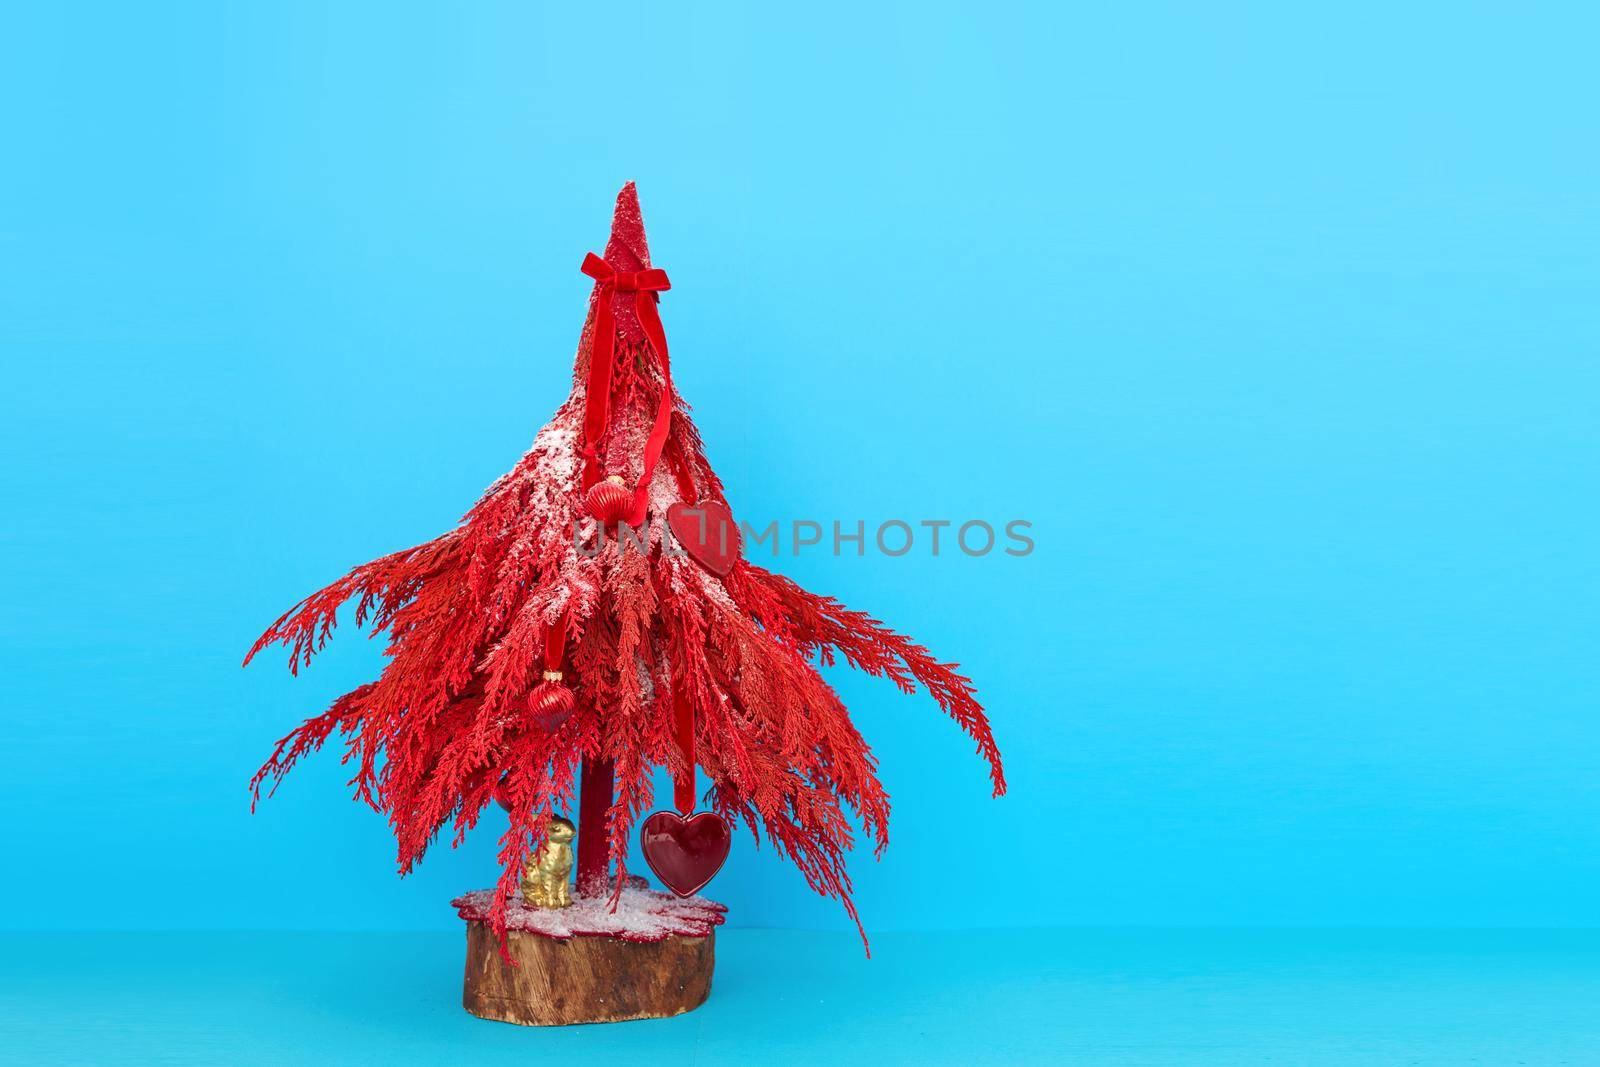 Miniature red decorative Christmas tree with tiny ornaments placed on vivid blue background in studio